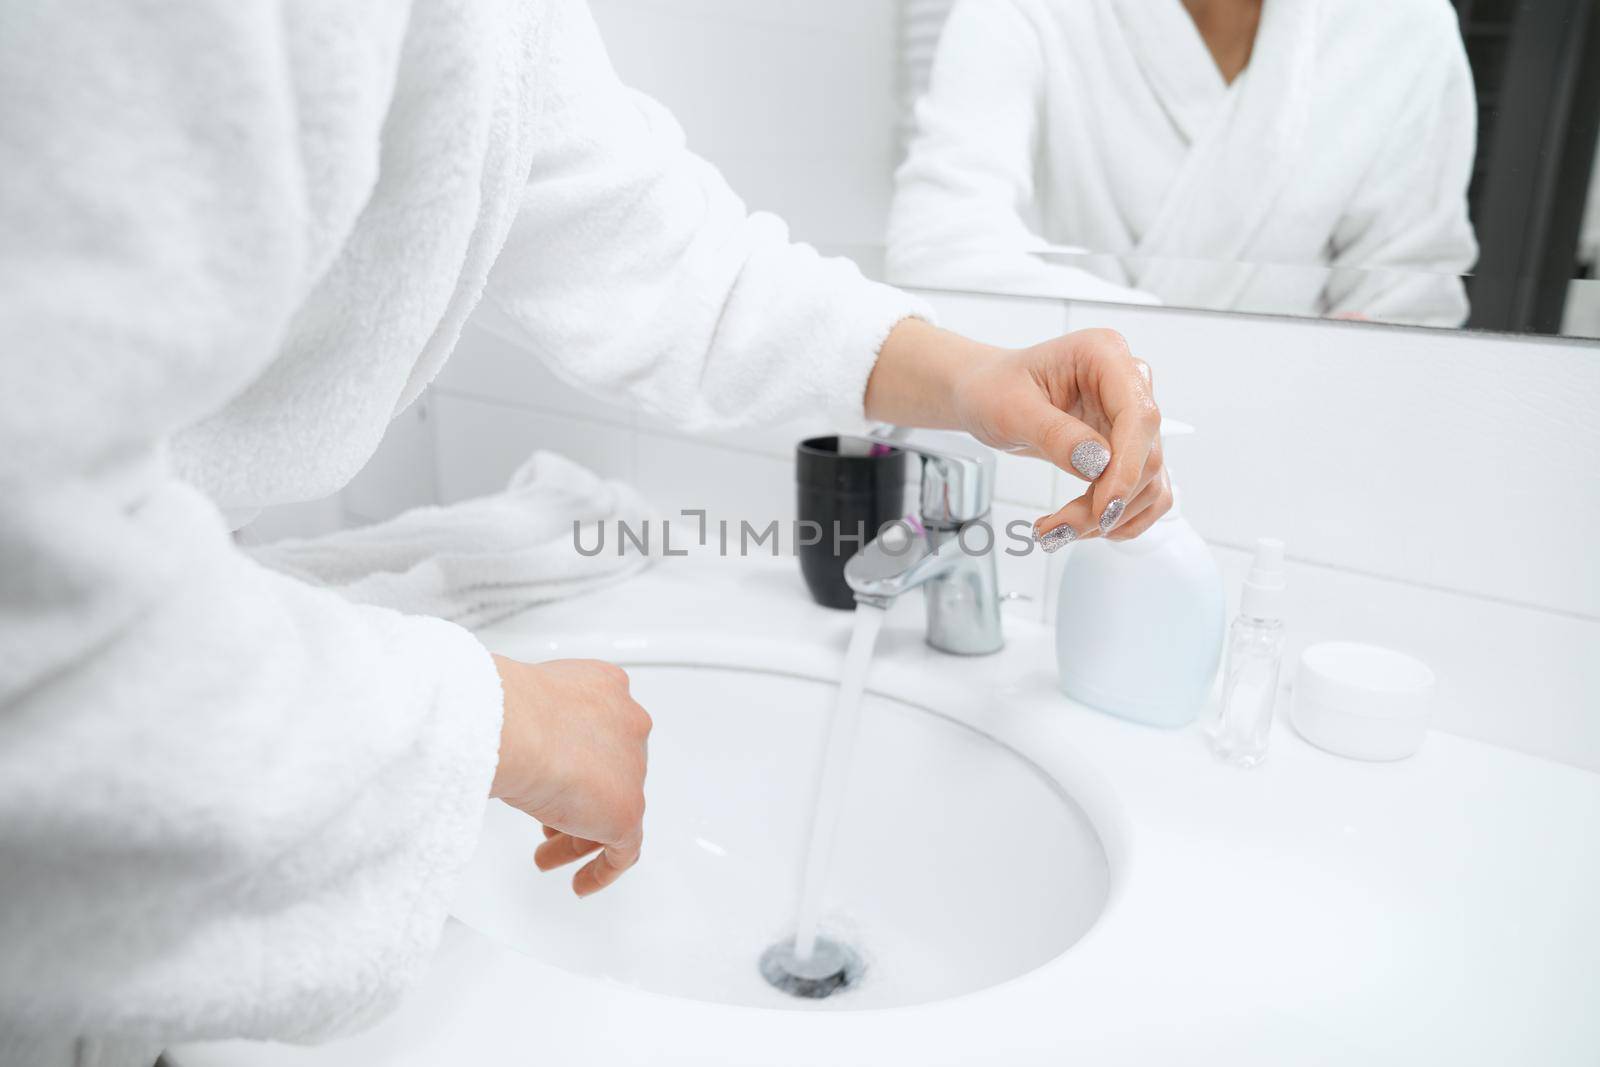  Woman in white robe standing near sink and washing hands.  by SerhiiBobyk